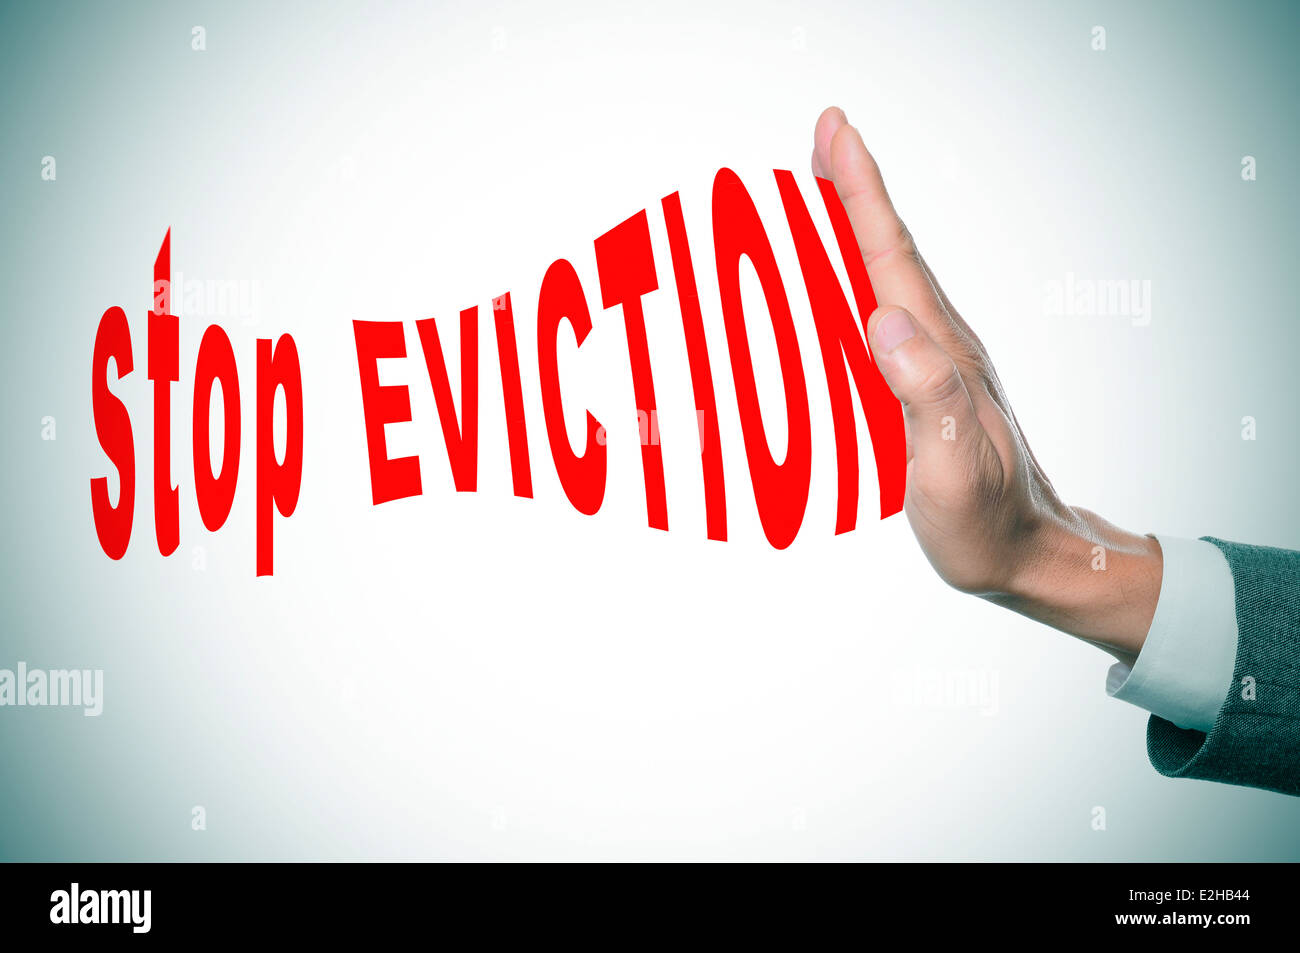 man hand stopping the text stop eviction Stock Photo